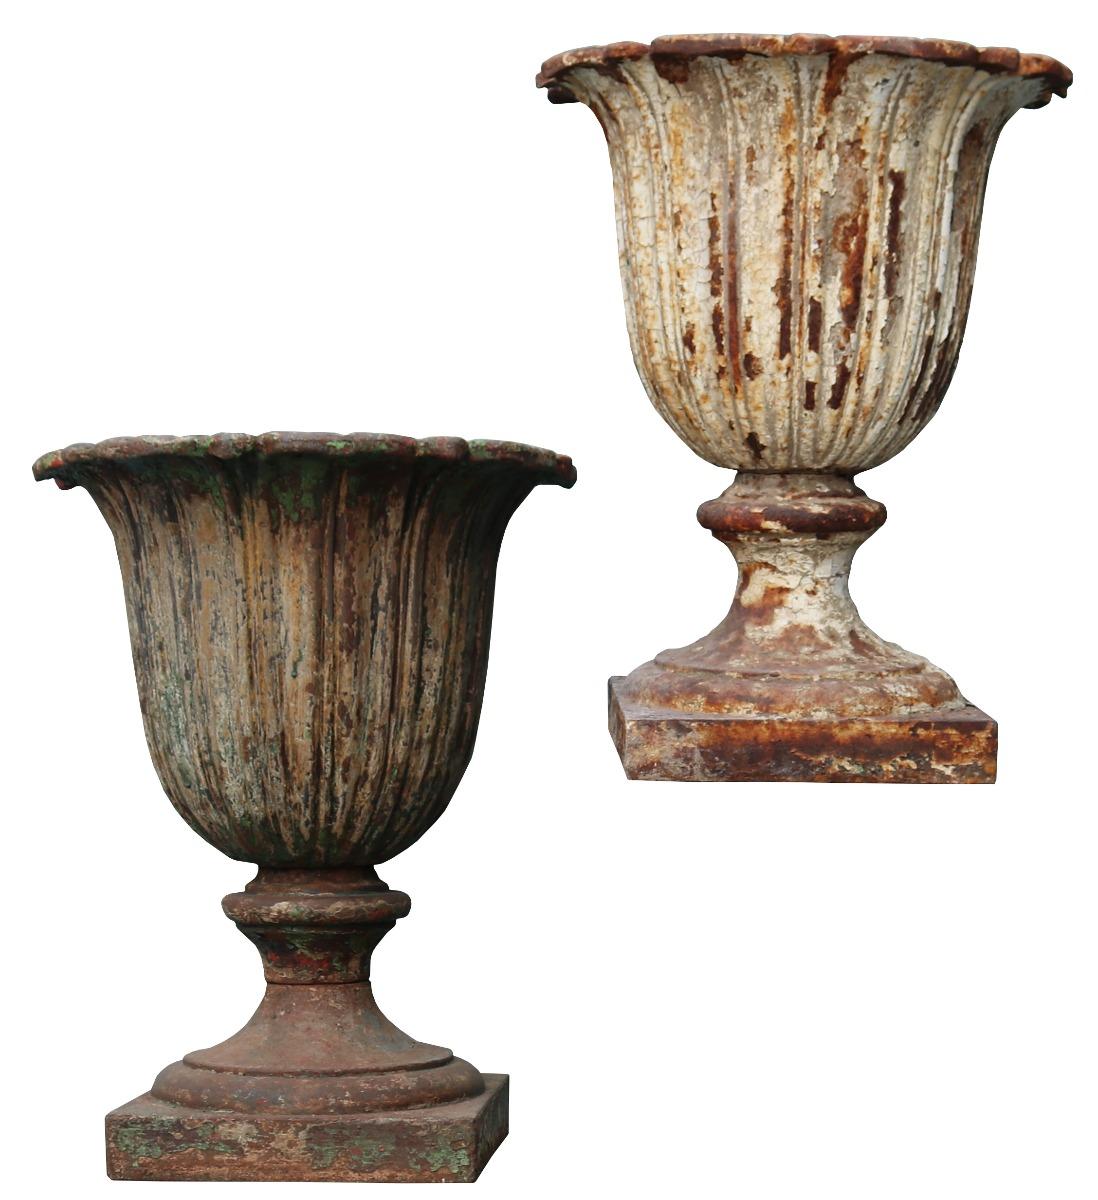 A pair of reclaimed fluted cast iron garden urns. Wooden plinths shown are not available.

Additional dimensions:

Base 28.5 x 28.5 cm.